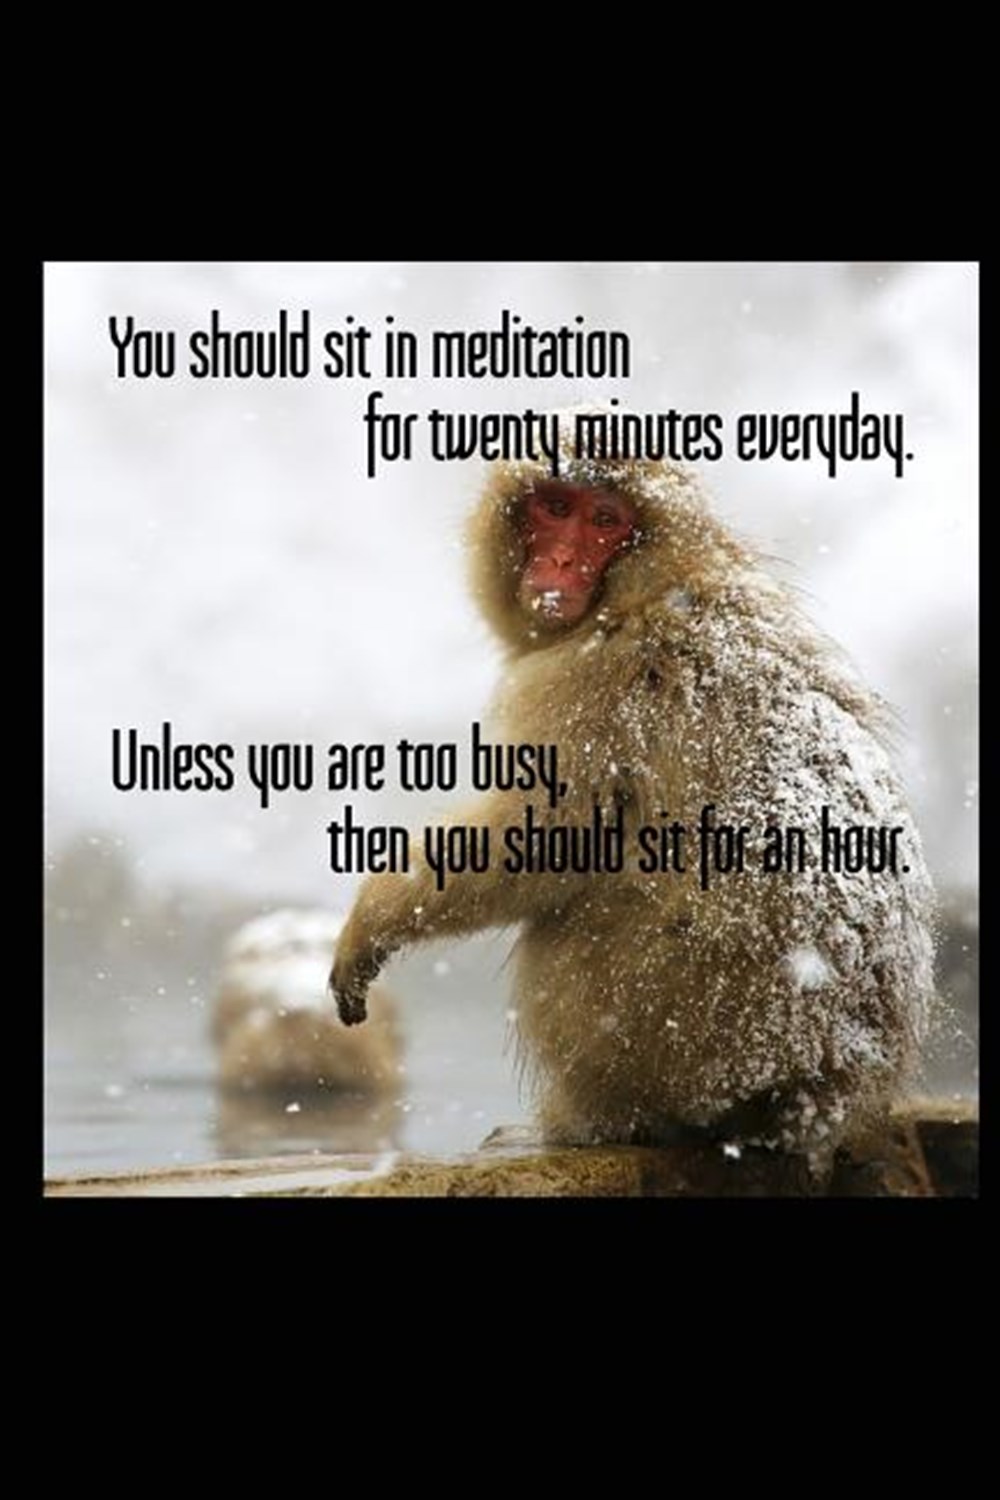 You Should Sit in Meditation for Twenty Minutes Everyday. Unless You Are Too Busy, Then You Should S